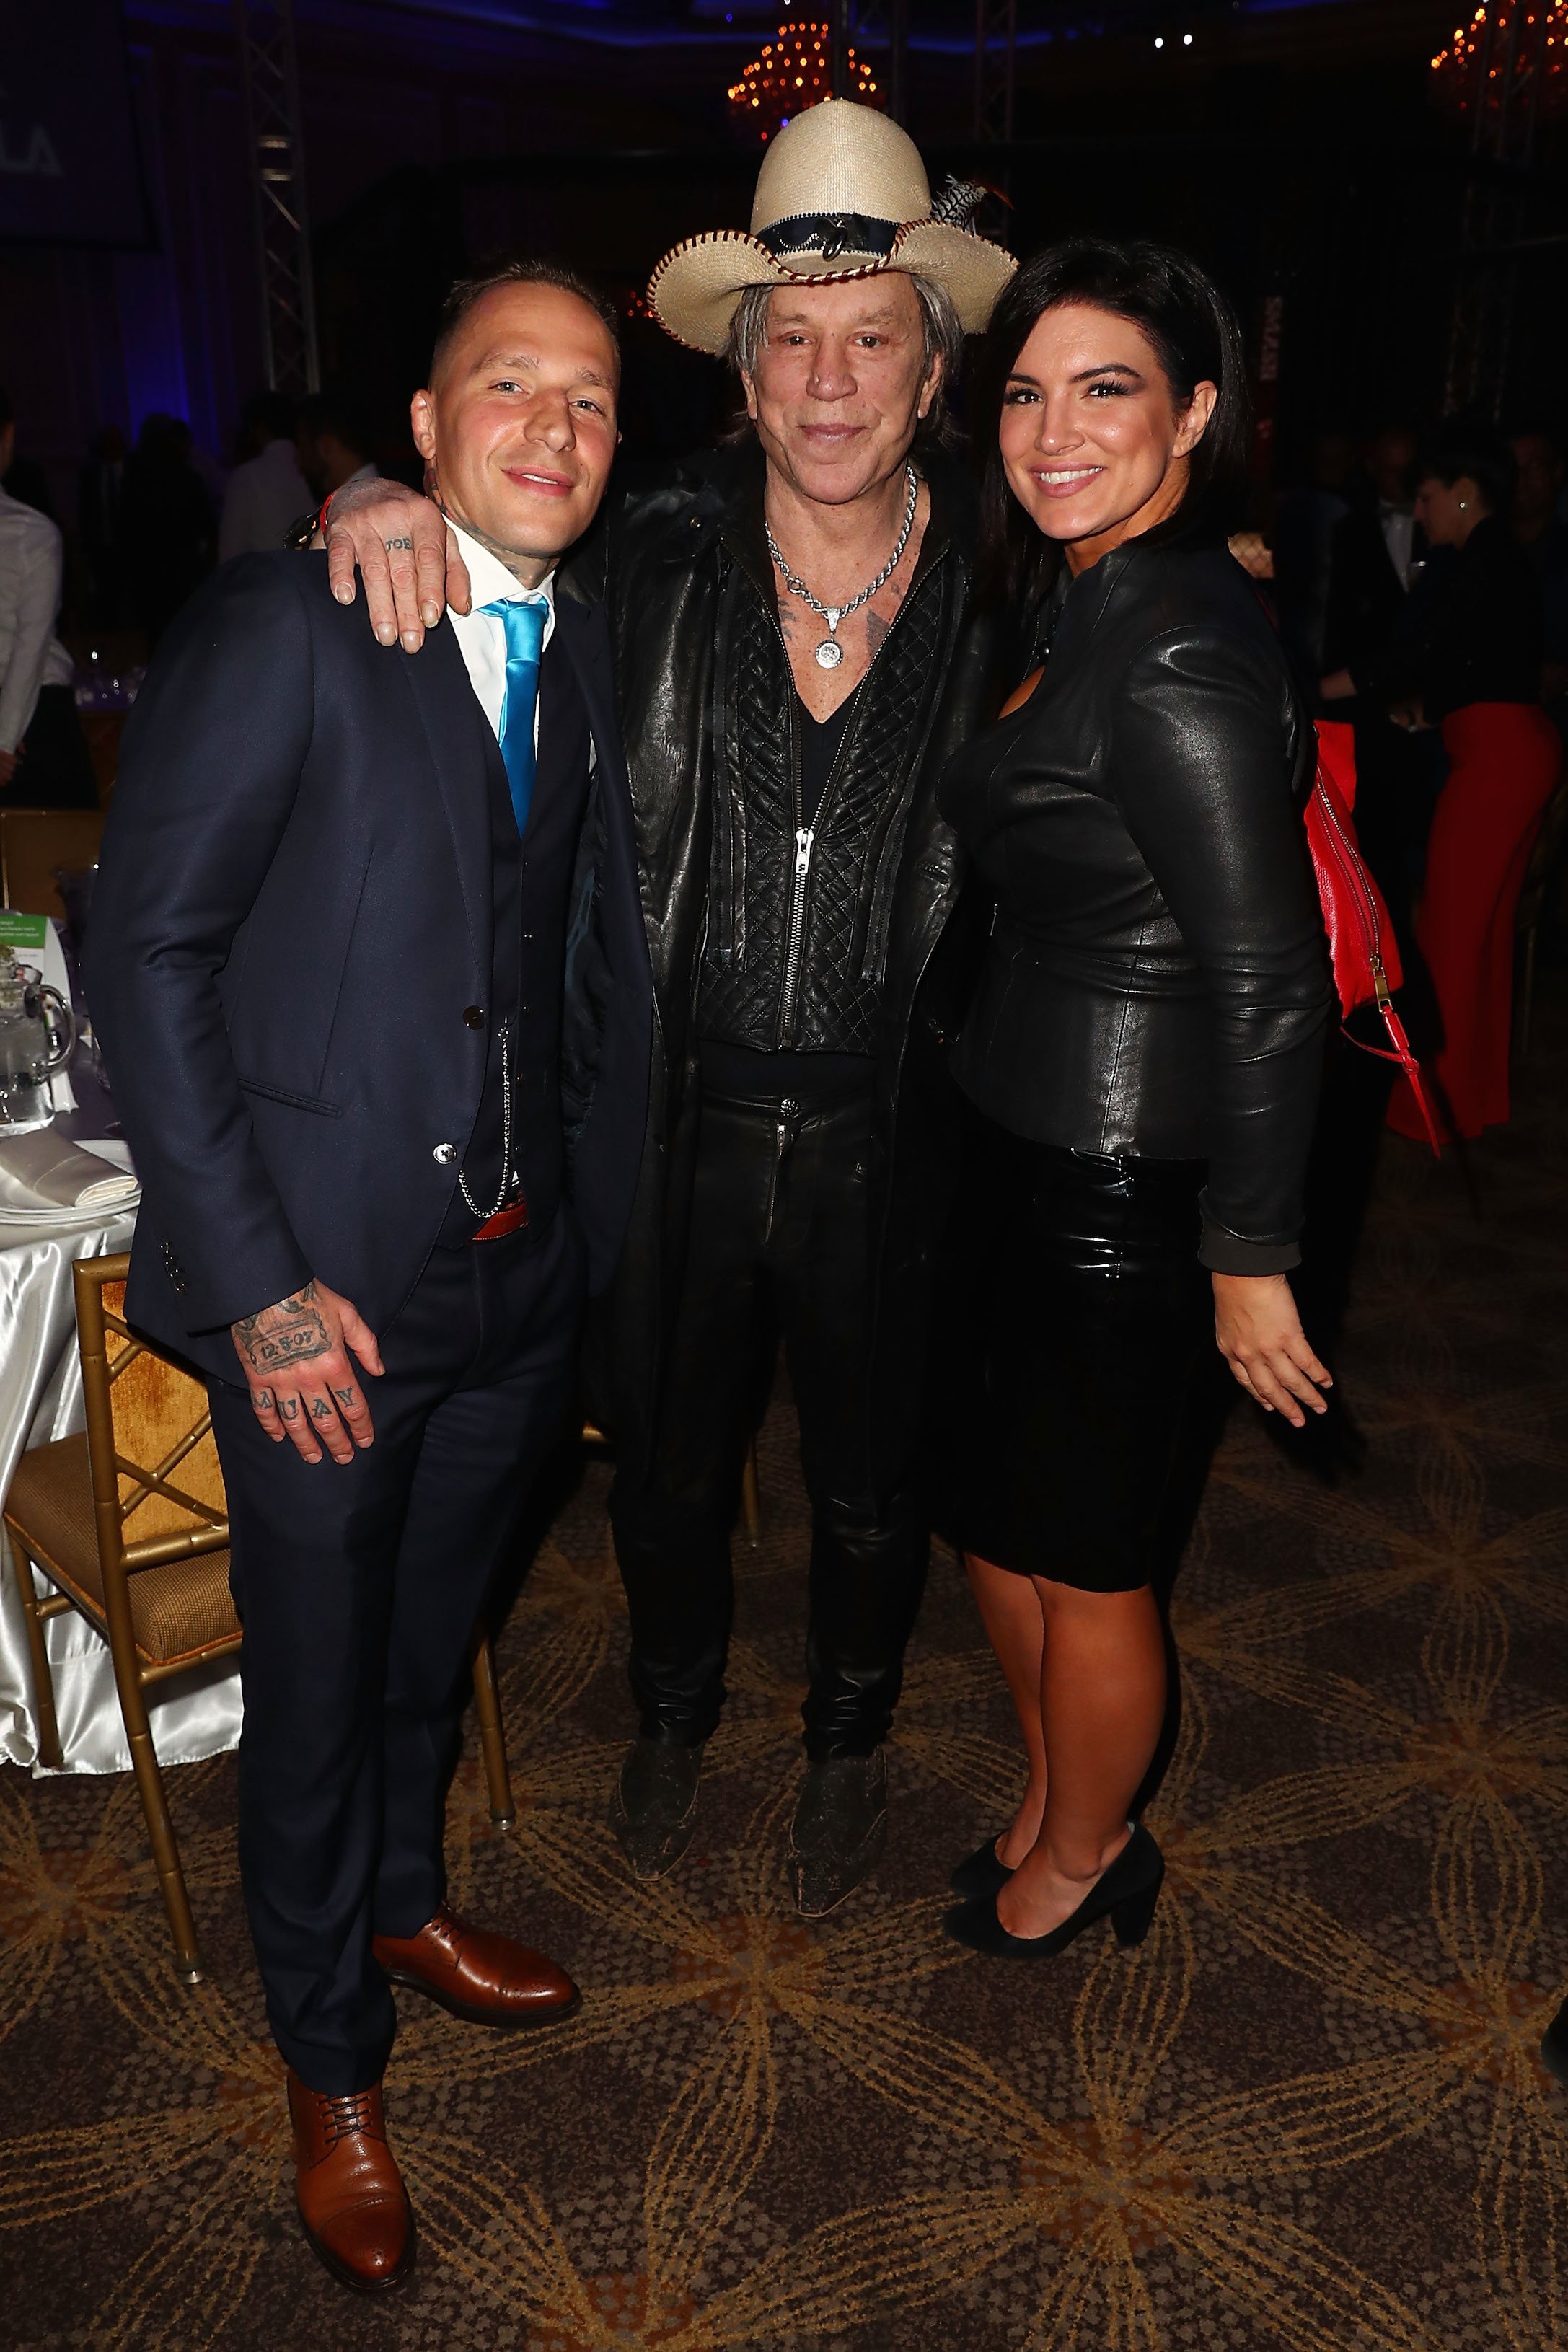 Kevin Ross, Mickey Rourke, and Gina Carano attend an event